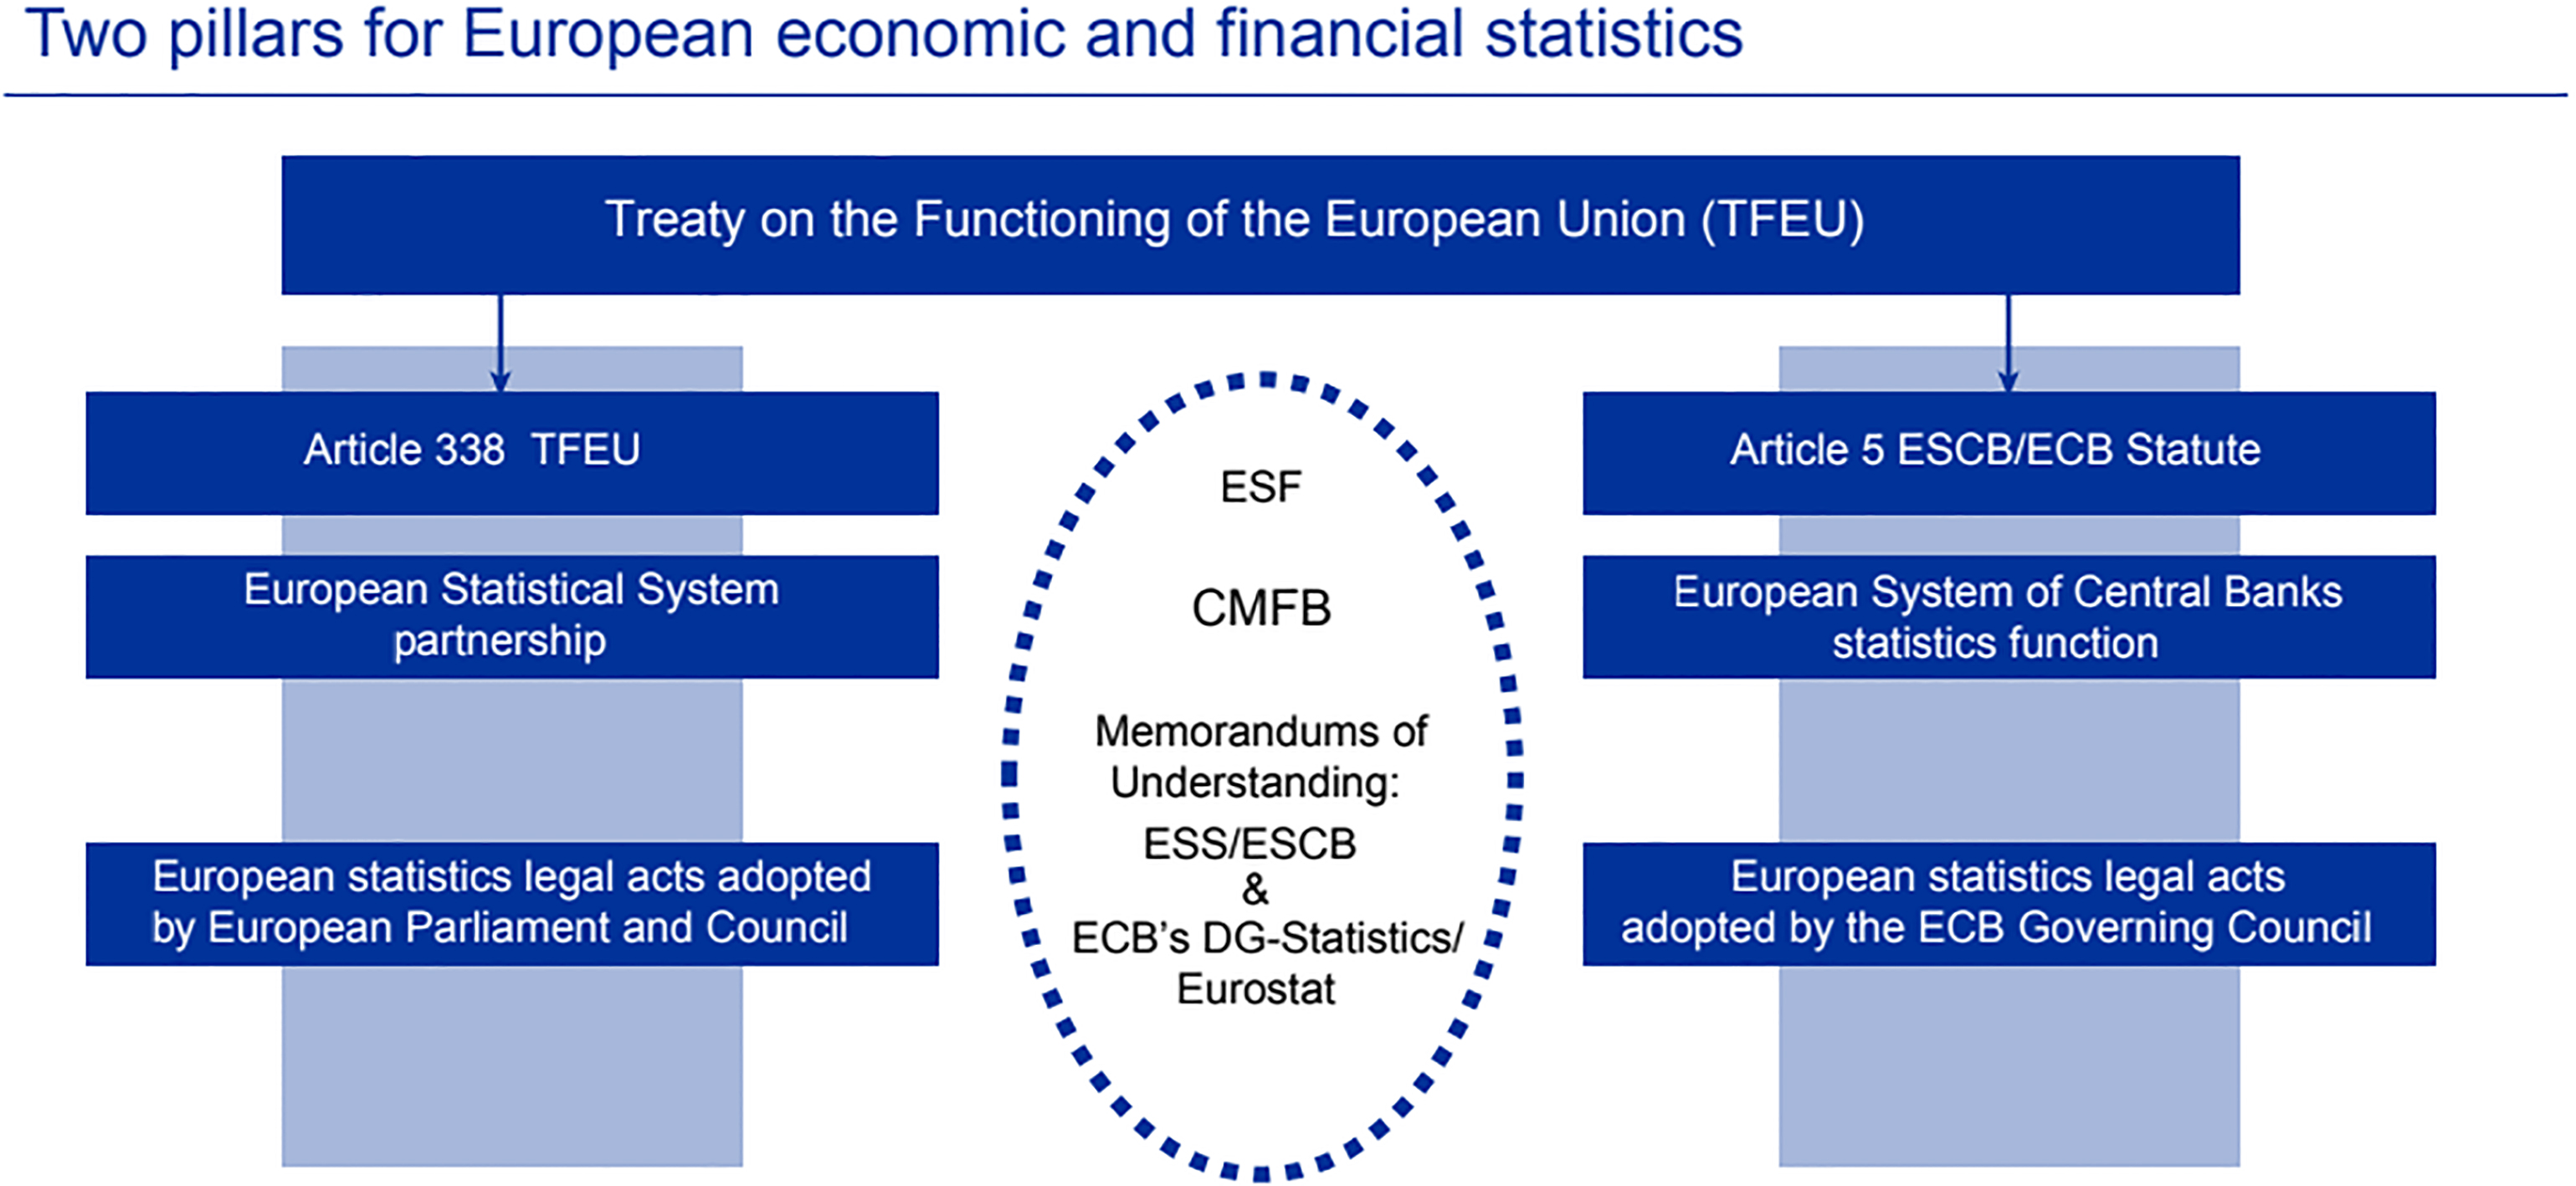 Two pillars for European economic and financial statistics.